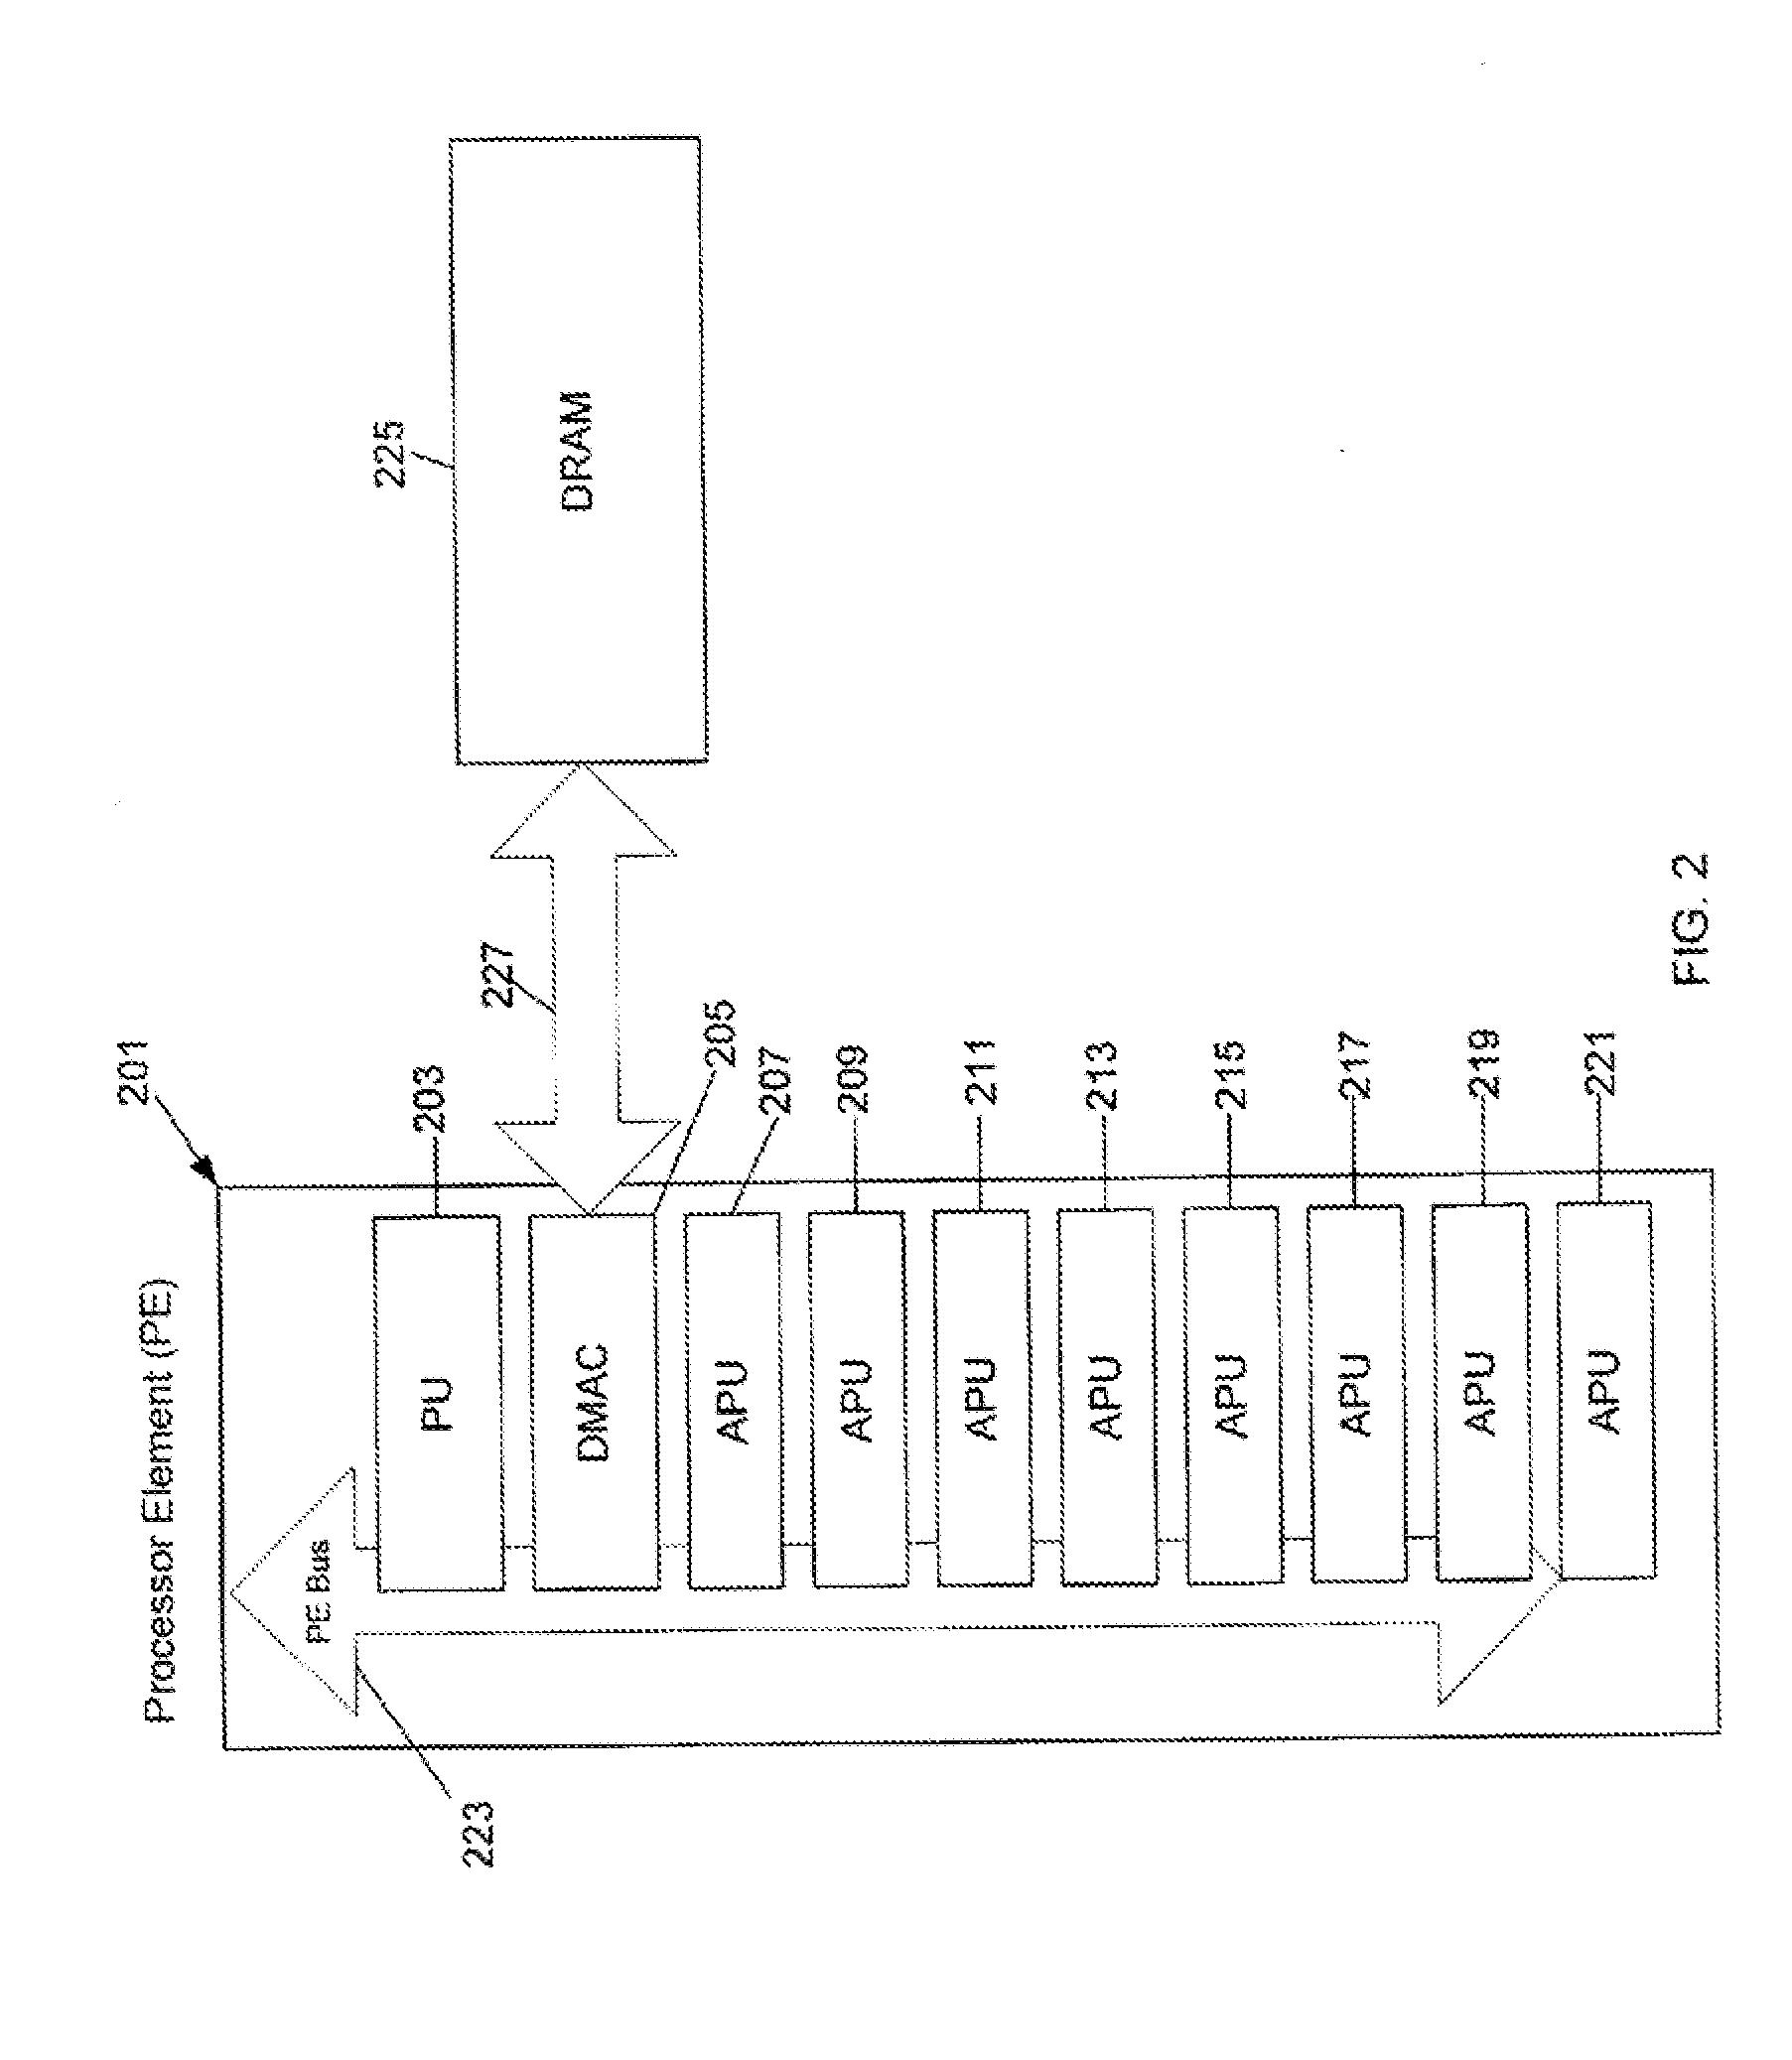 Non-Homogeneous Multi-Processor System With Shared Memory